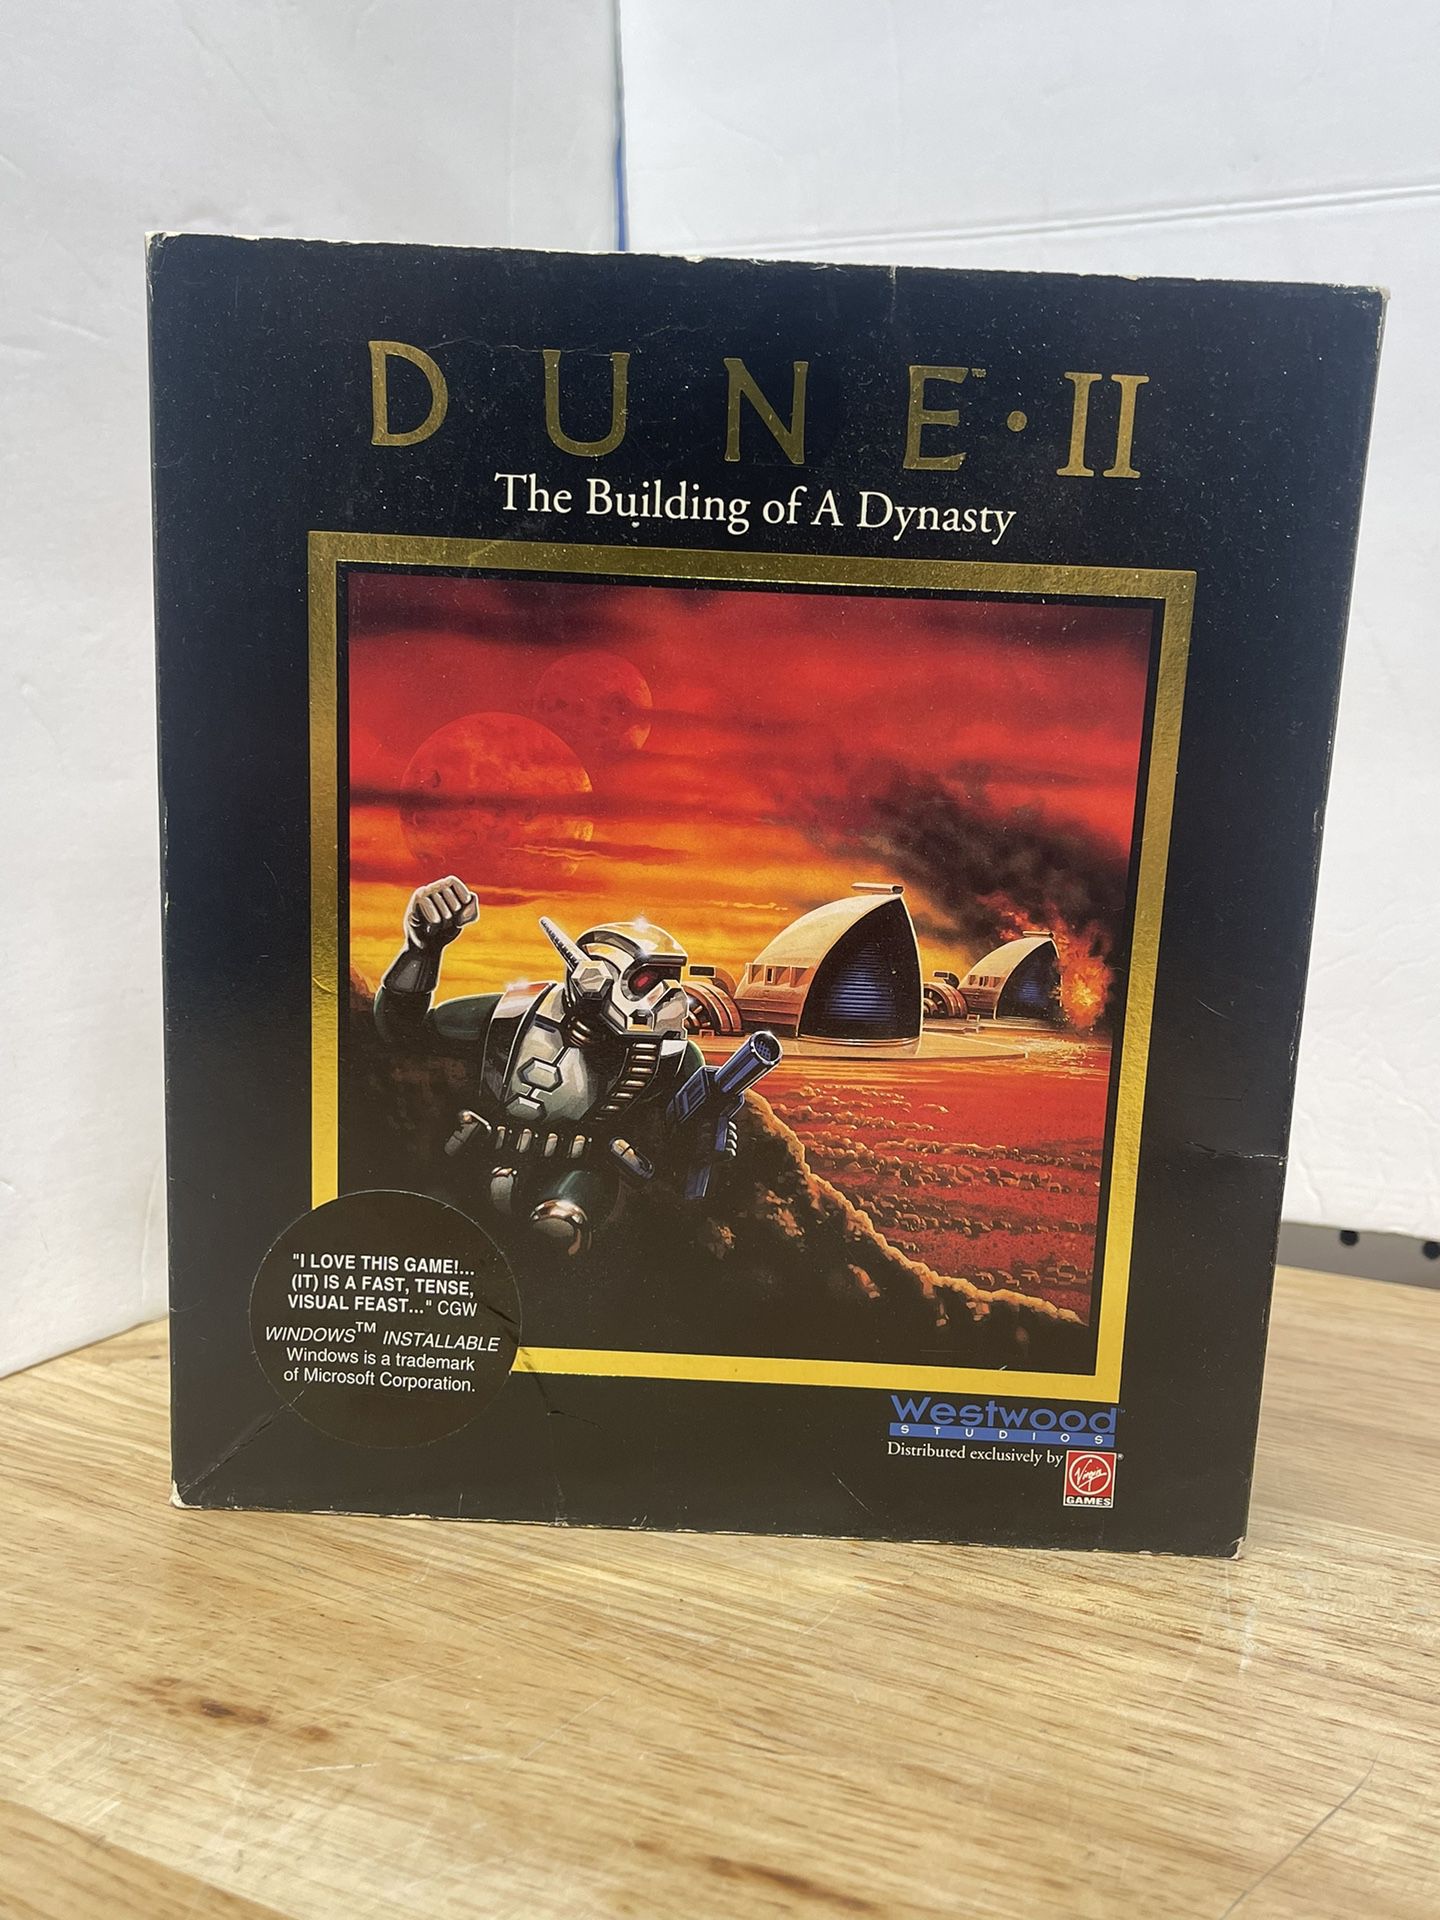 Dune II: The Building of A Dynasty IBM PC Game 3.5" Floppy Westwood Virgin